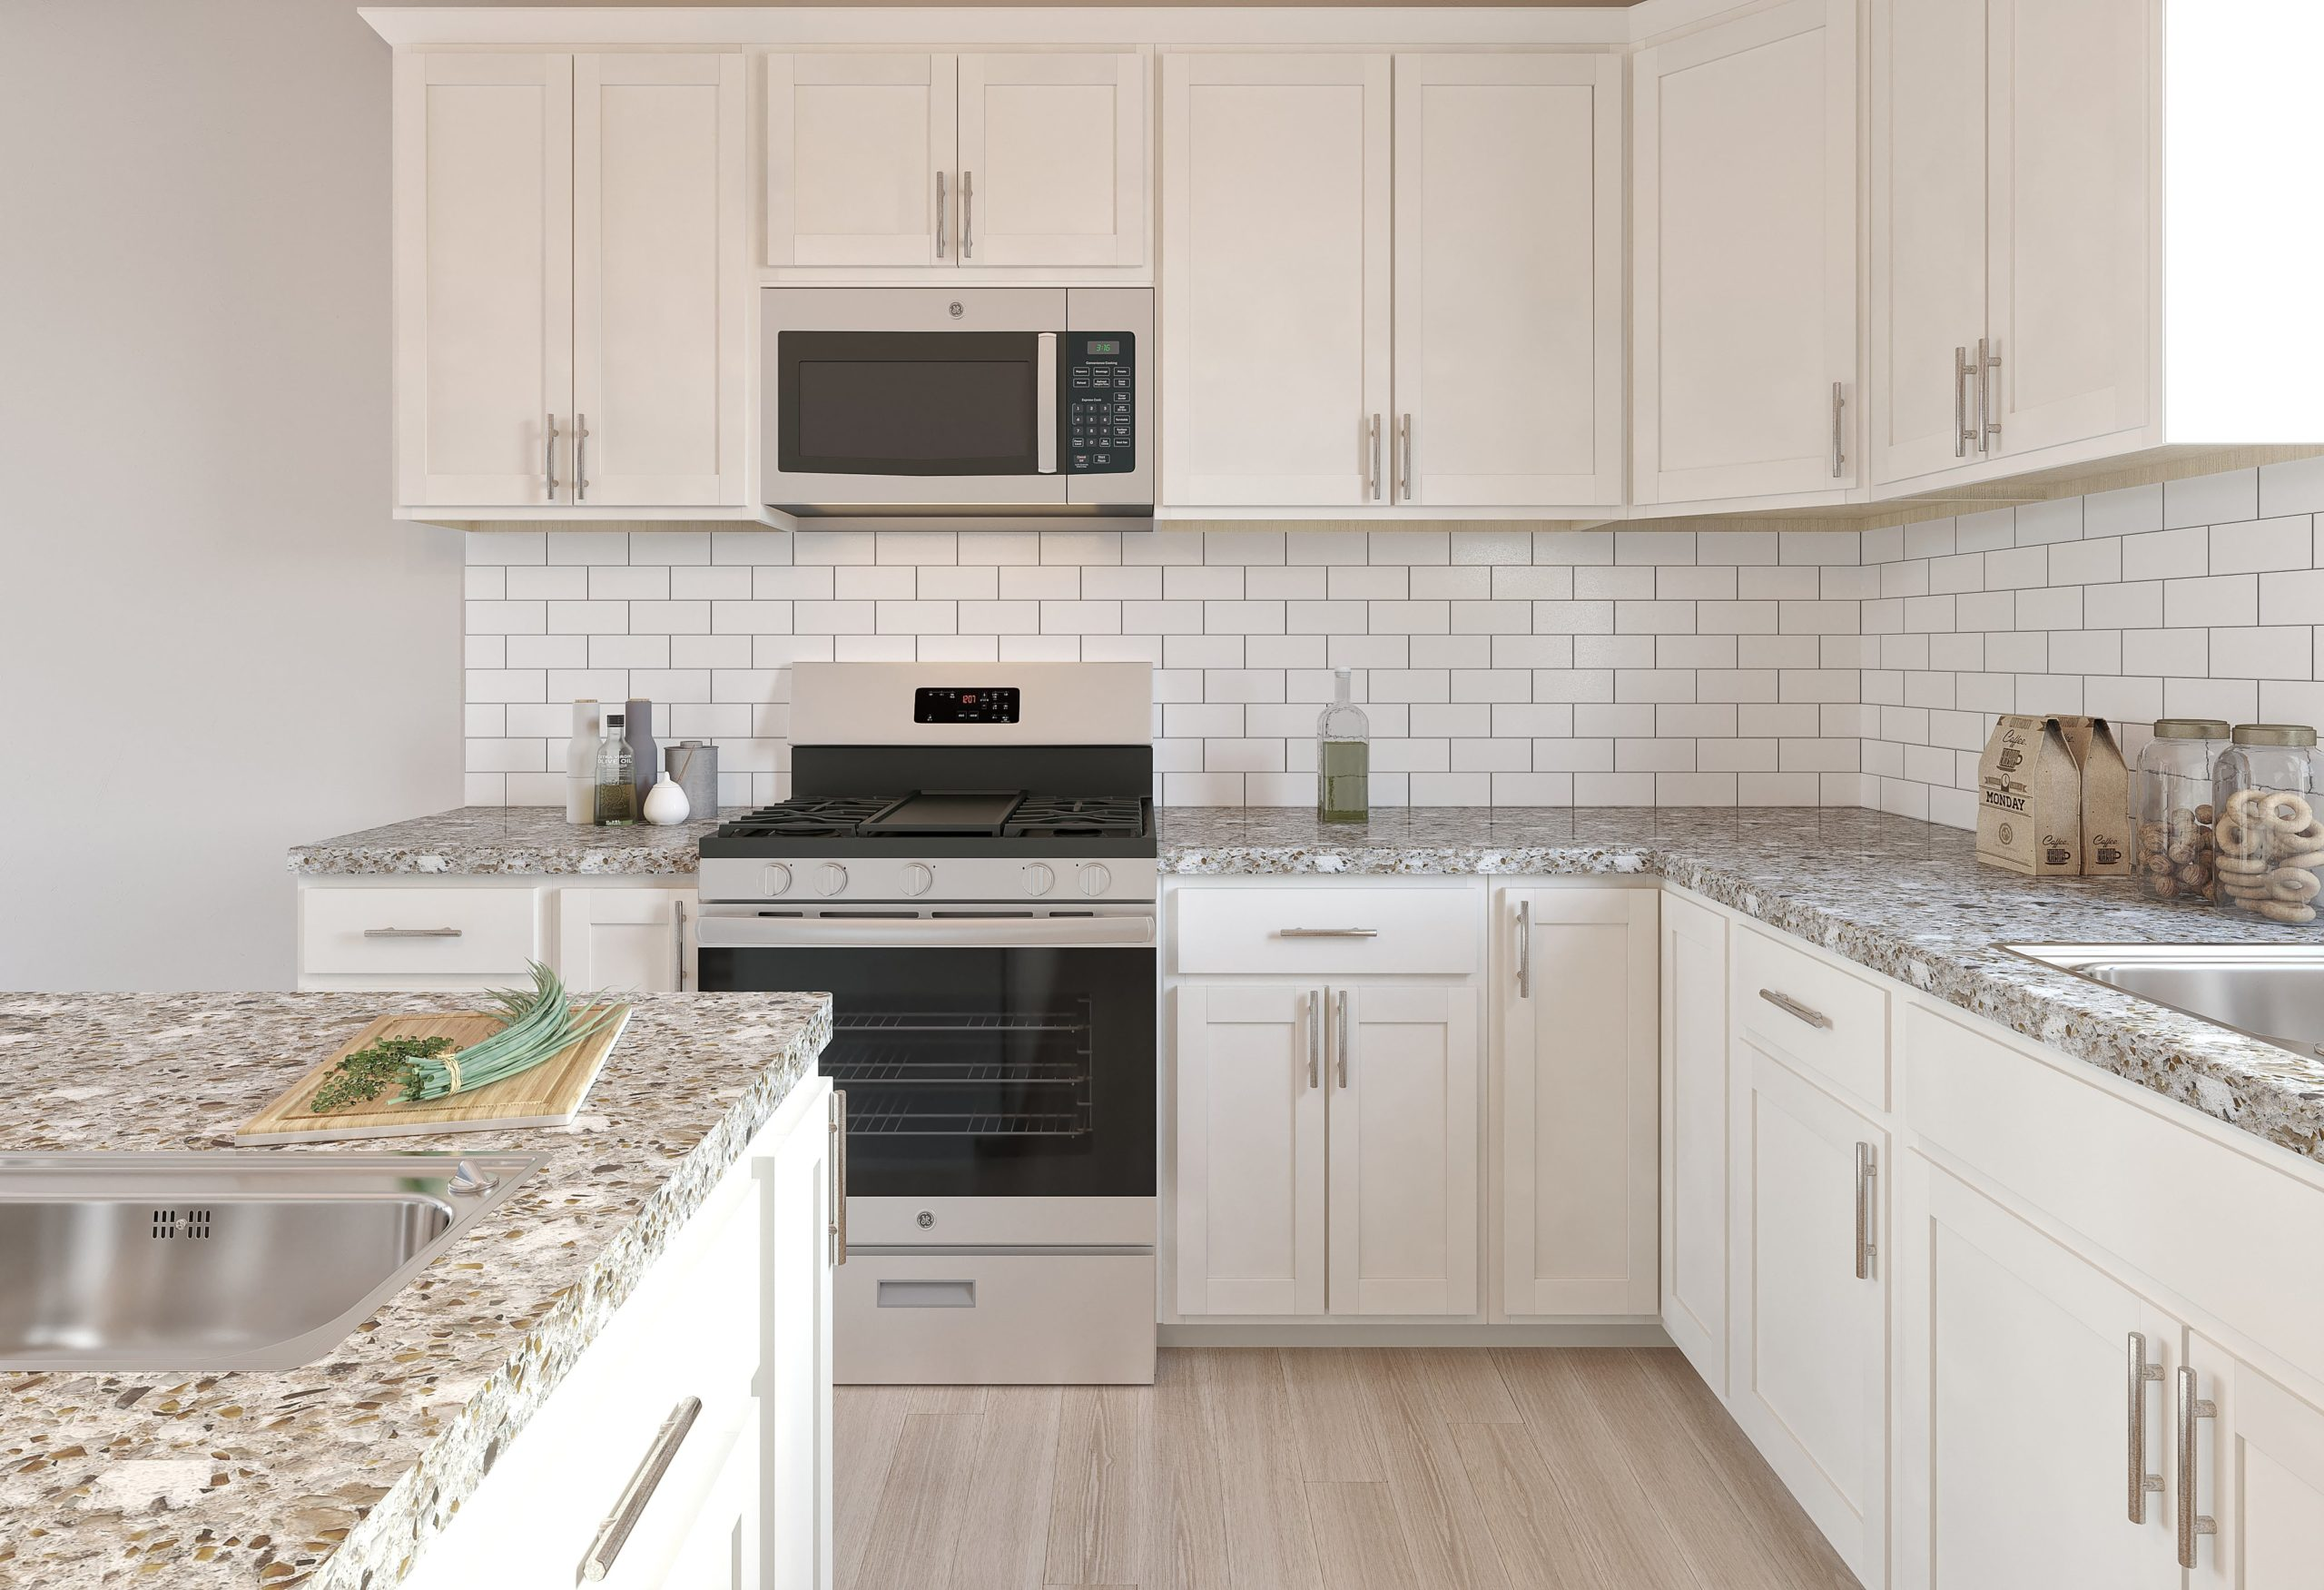 How To Select A Kitchen Cabinet Baskets Supplier